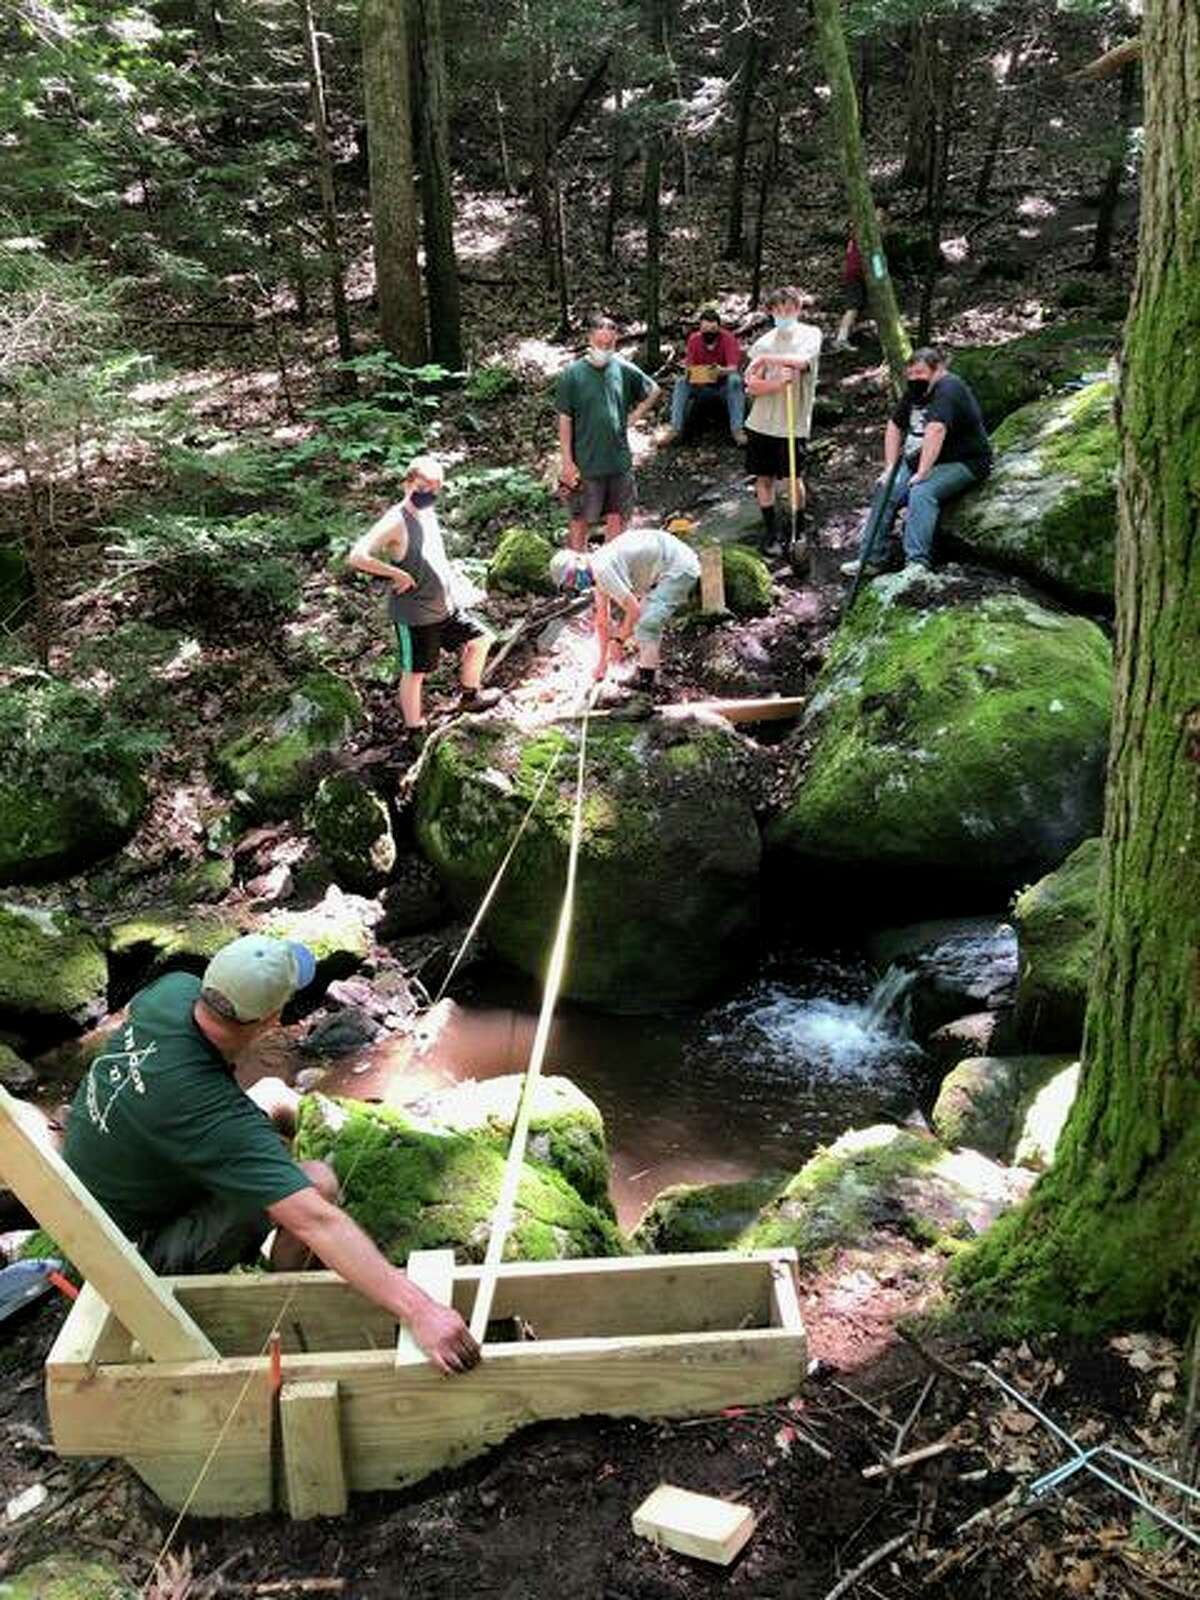 Korey Barber, a Boy Scout with the Housatonic Troop 27 Life Scout and a rising senior at Shelton High School, is organizing construction of a bridge crossing Round Hill Brook on the Paugussett trail. Above, Barber and other volunteers work on creating the bridge.